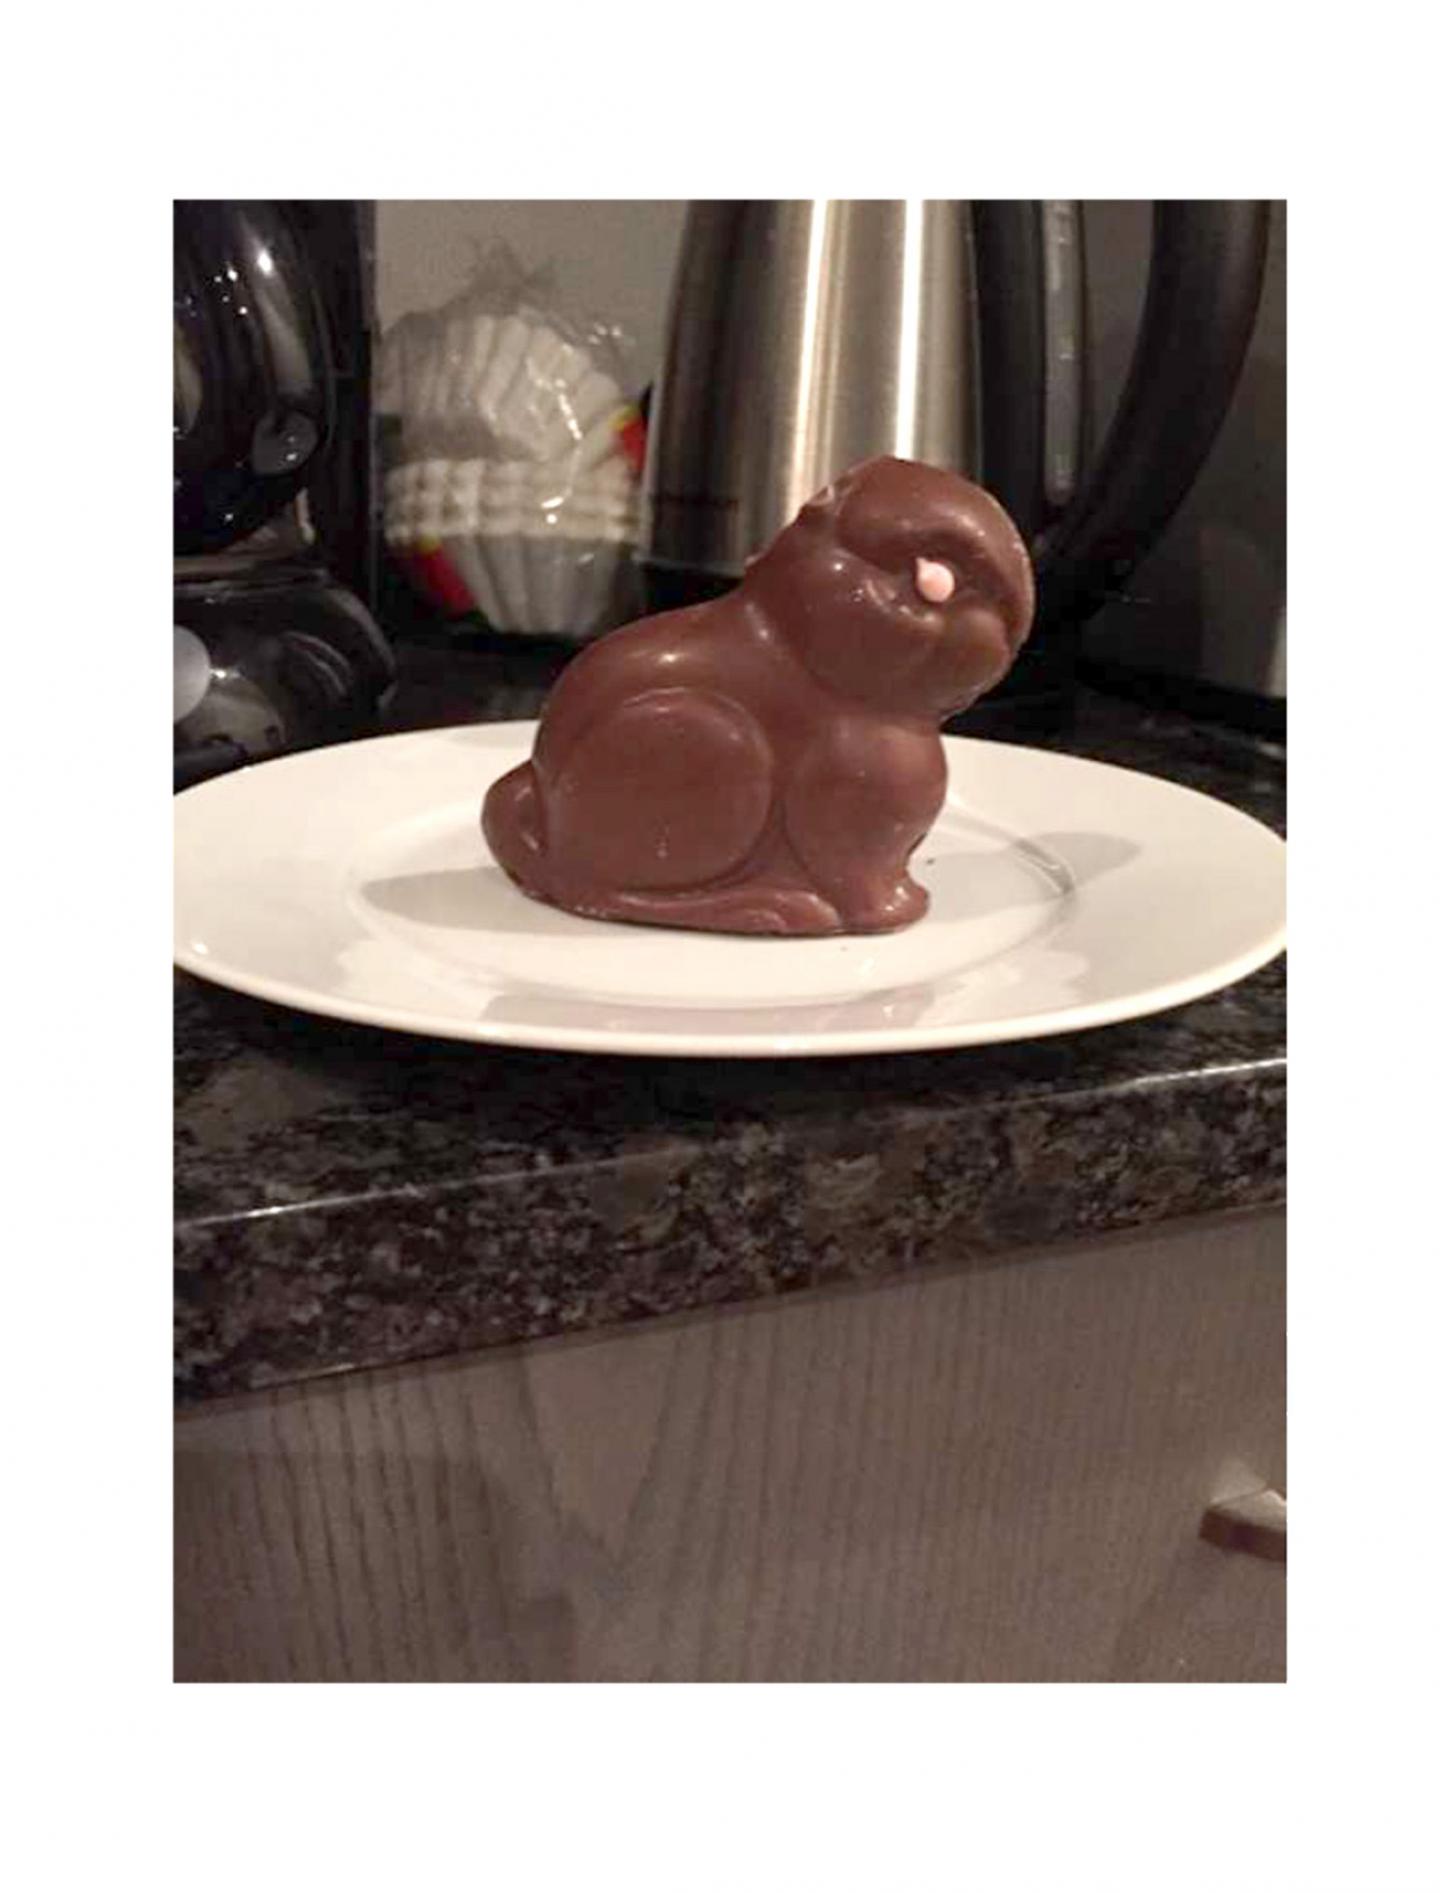 How Do You Eat Your Chocolate Bunny? Vast Majority Prefer to Start with the Ears